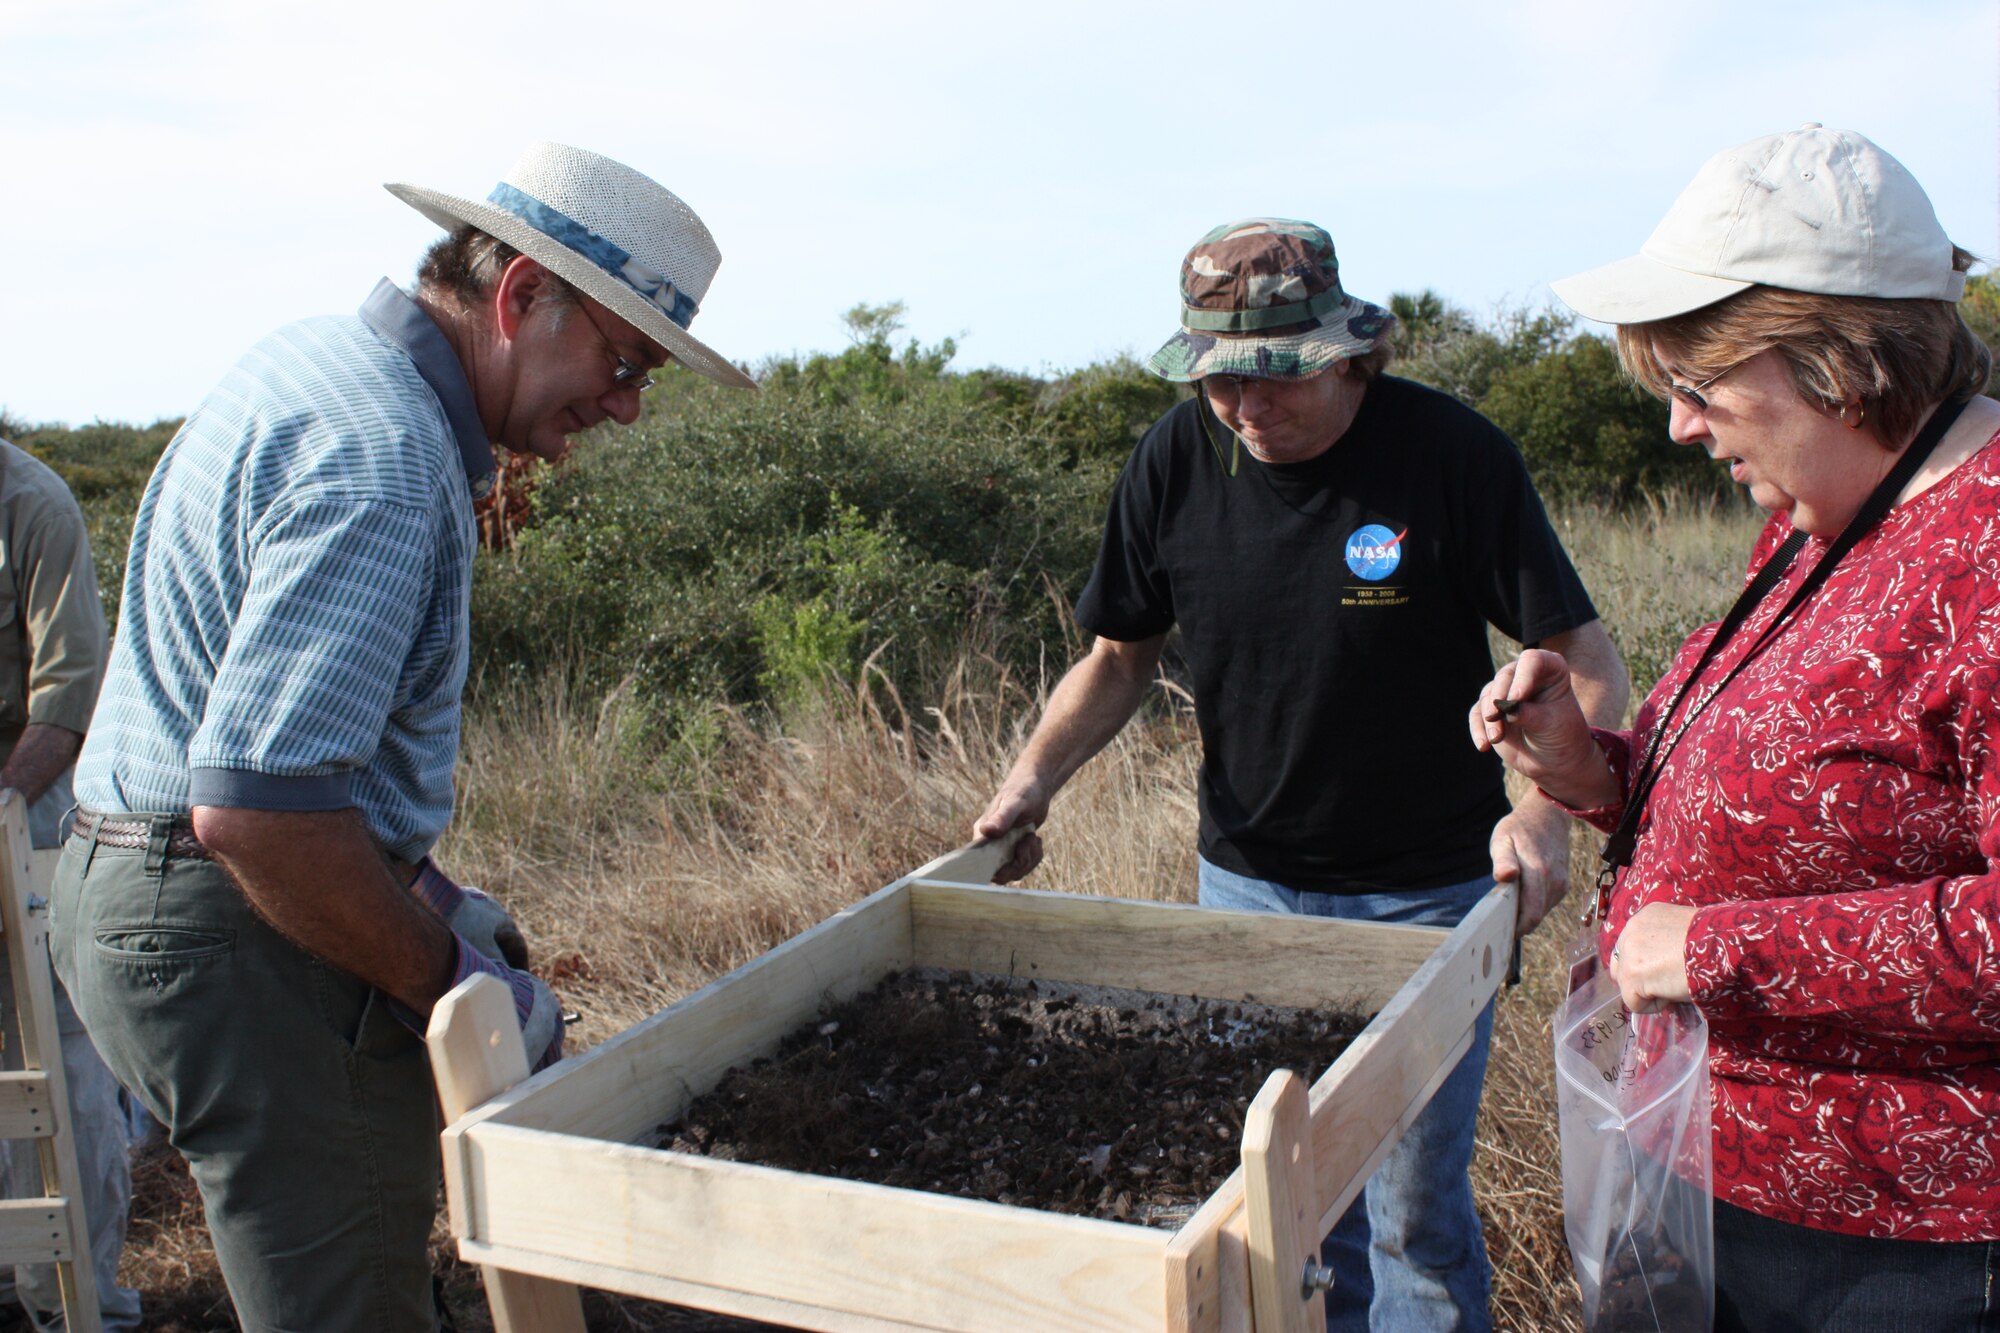 (left to right) Dale Hawkins, Timothy Kozusko and Elaine Williams sift through dirt and stones for artifacts at the Little Midden archeological site at Cape Canaveral Feb. 27. (U.S. Air Force photo/Airman 1st Class David Dobrydney)